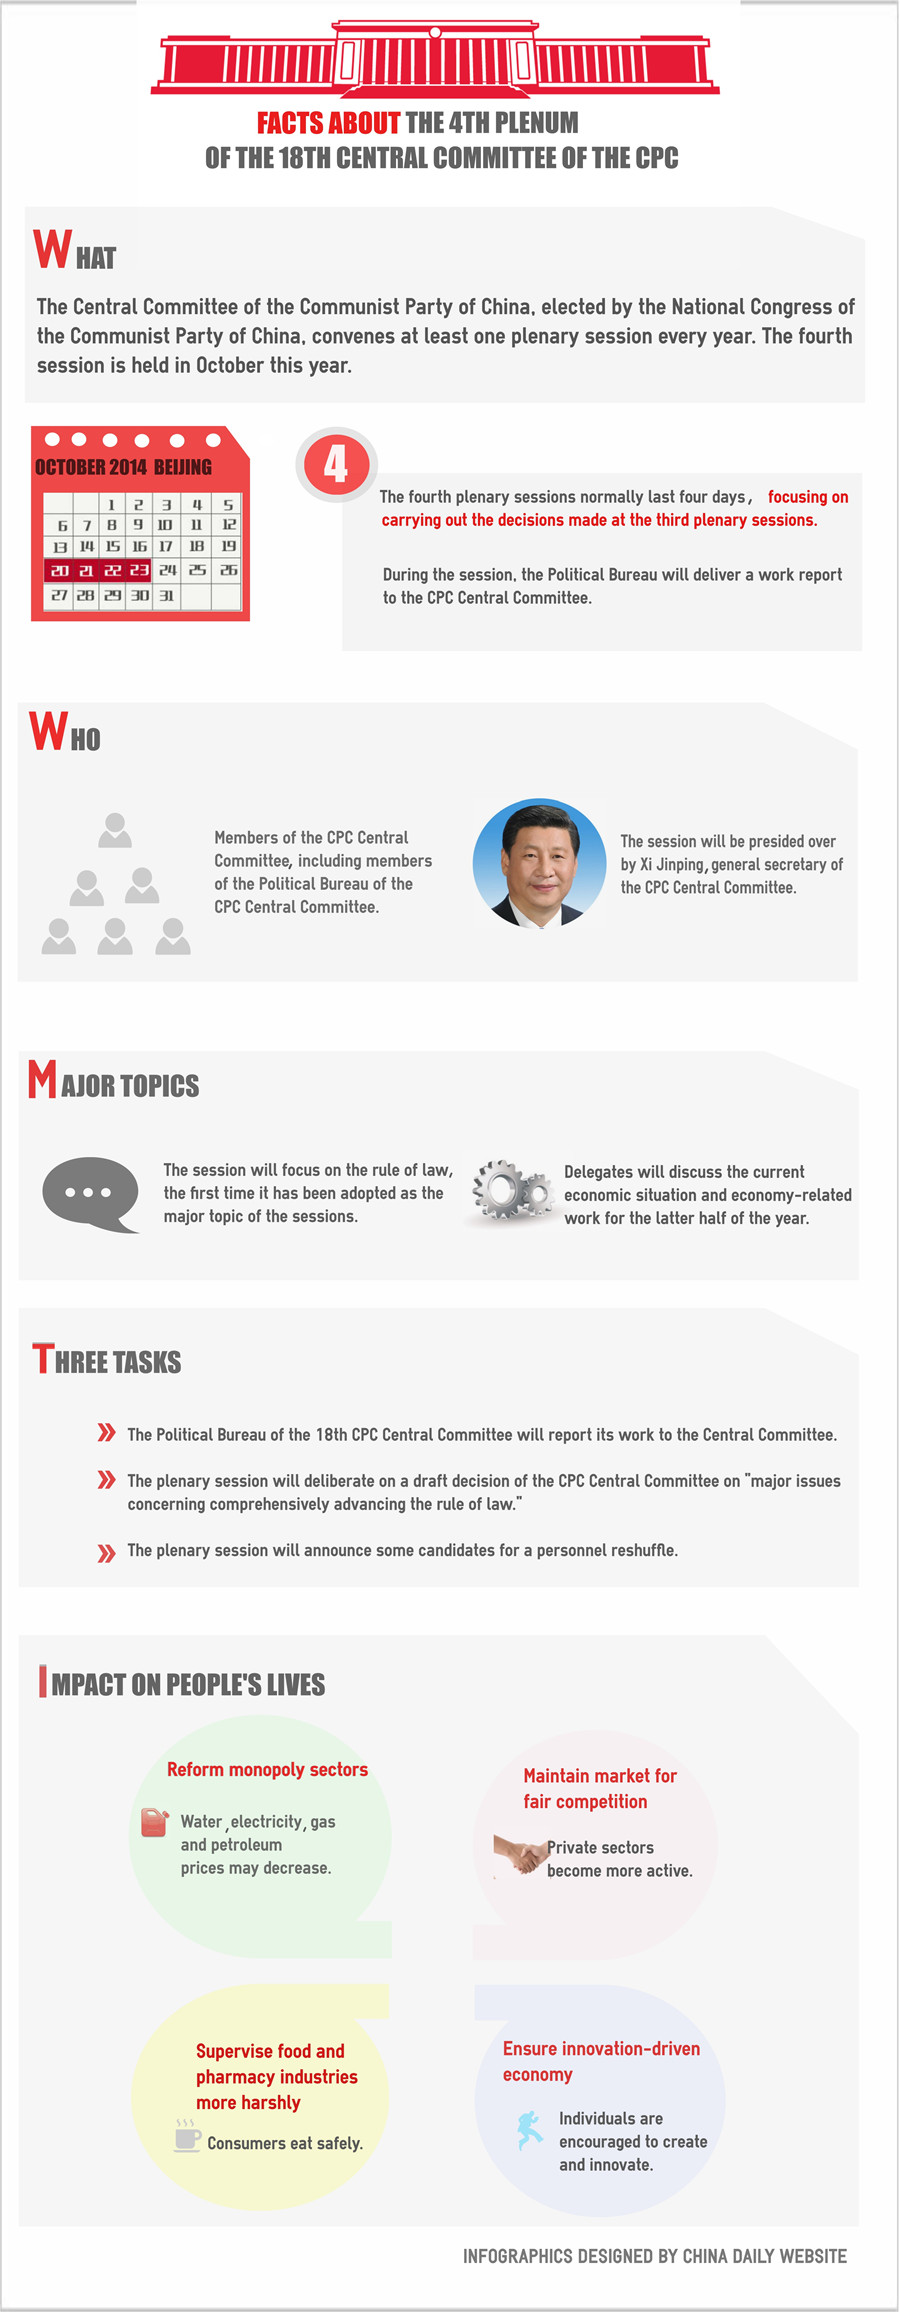 Facts about the 4th Plenum of the 18th Central Committee of the CPC